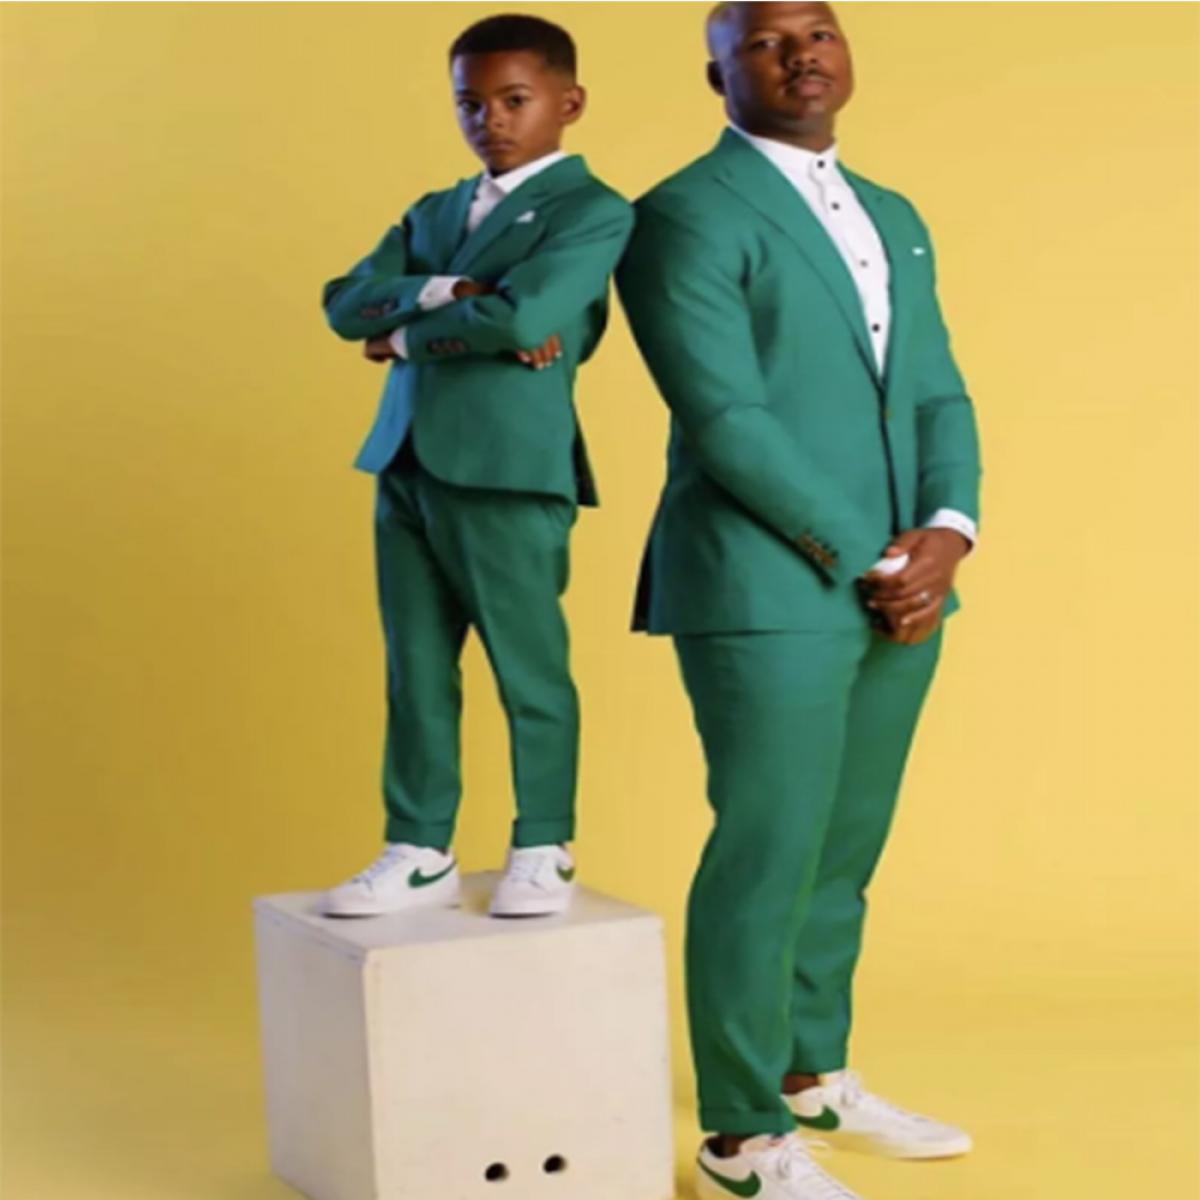 Her And Son Parent Child Clothing Slim Fit Green Men Suits Boys Suits/wedding Formal Costume Homme Male Children Set Bla